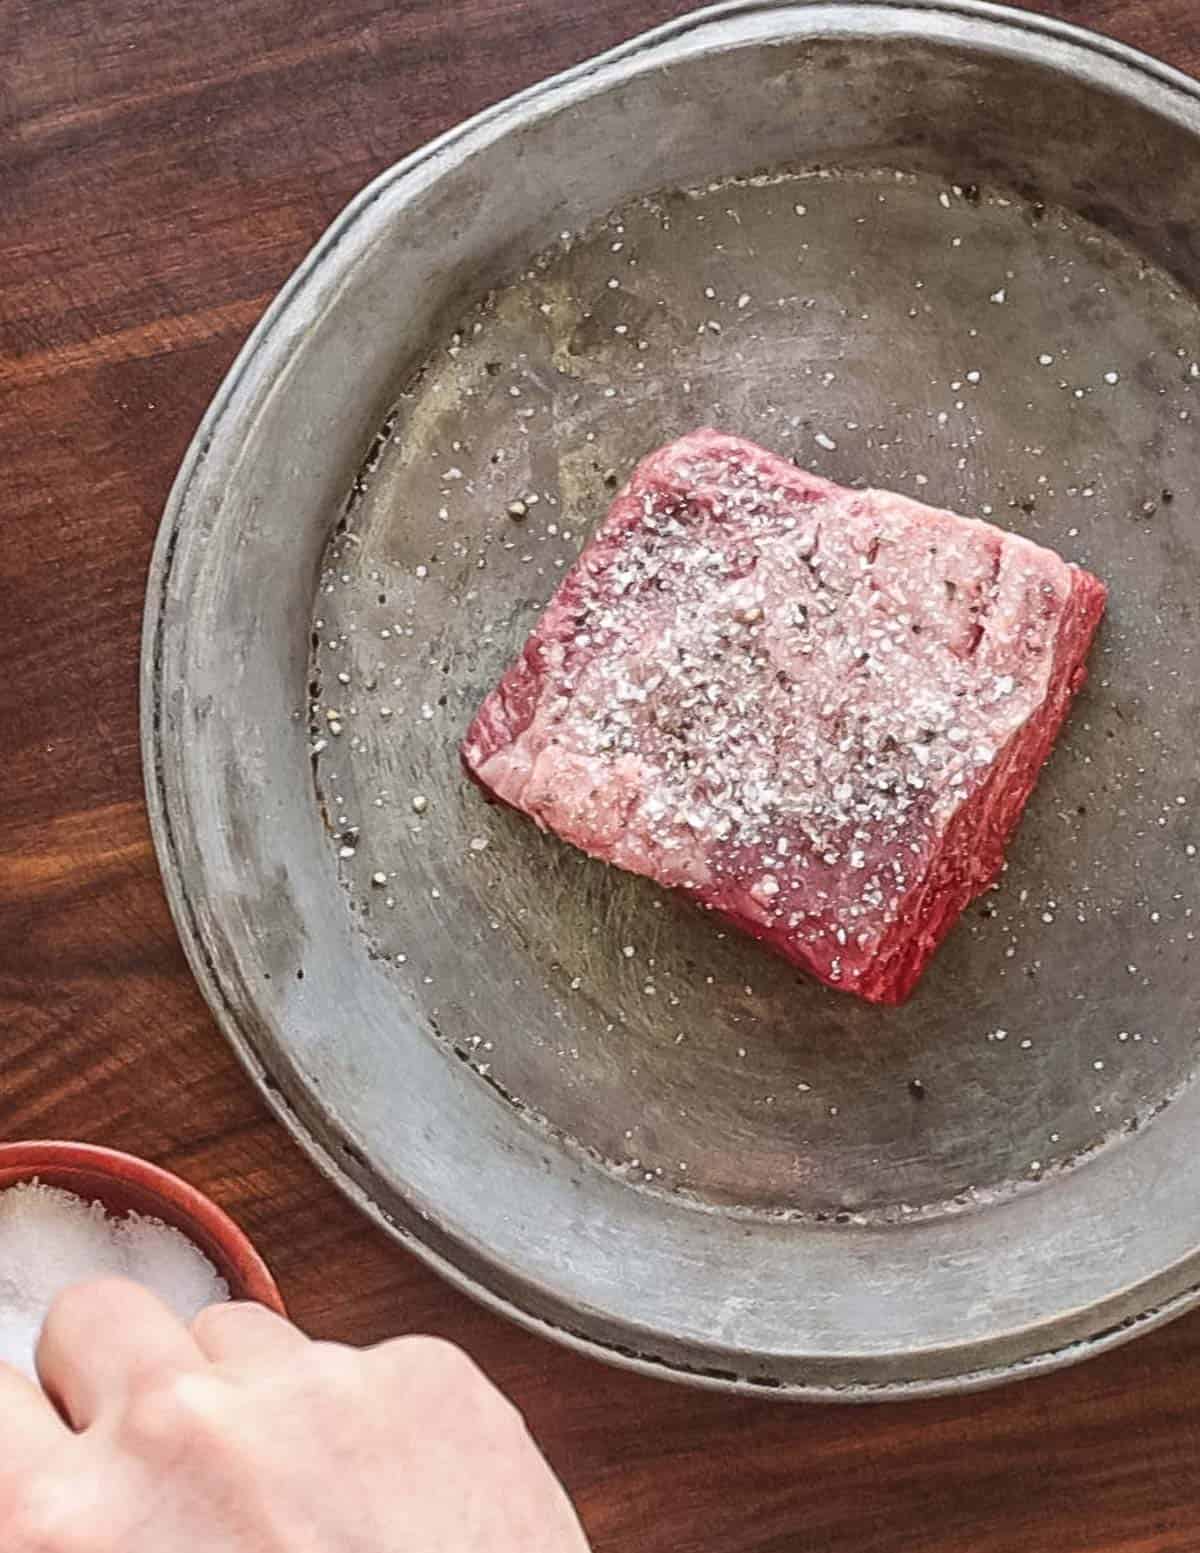 Dry brining a steak with salt and pepper before cooking.